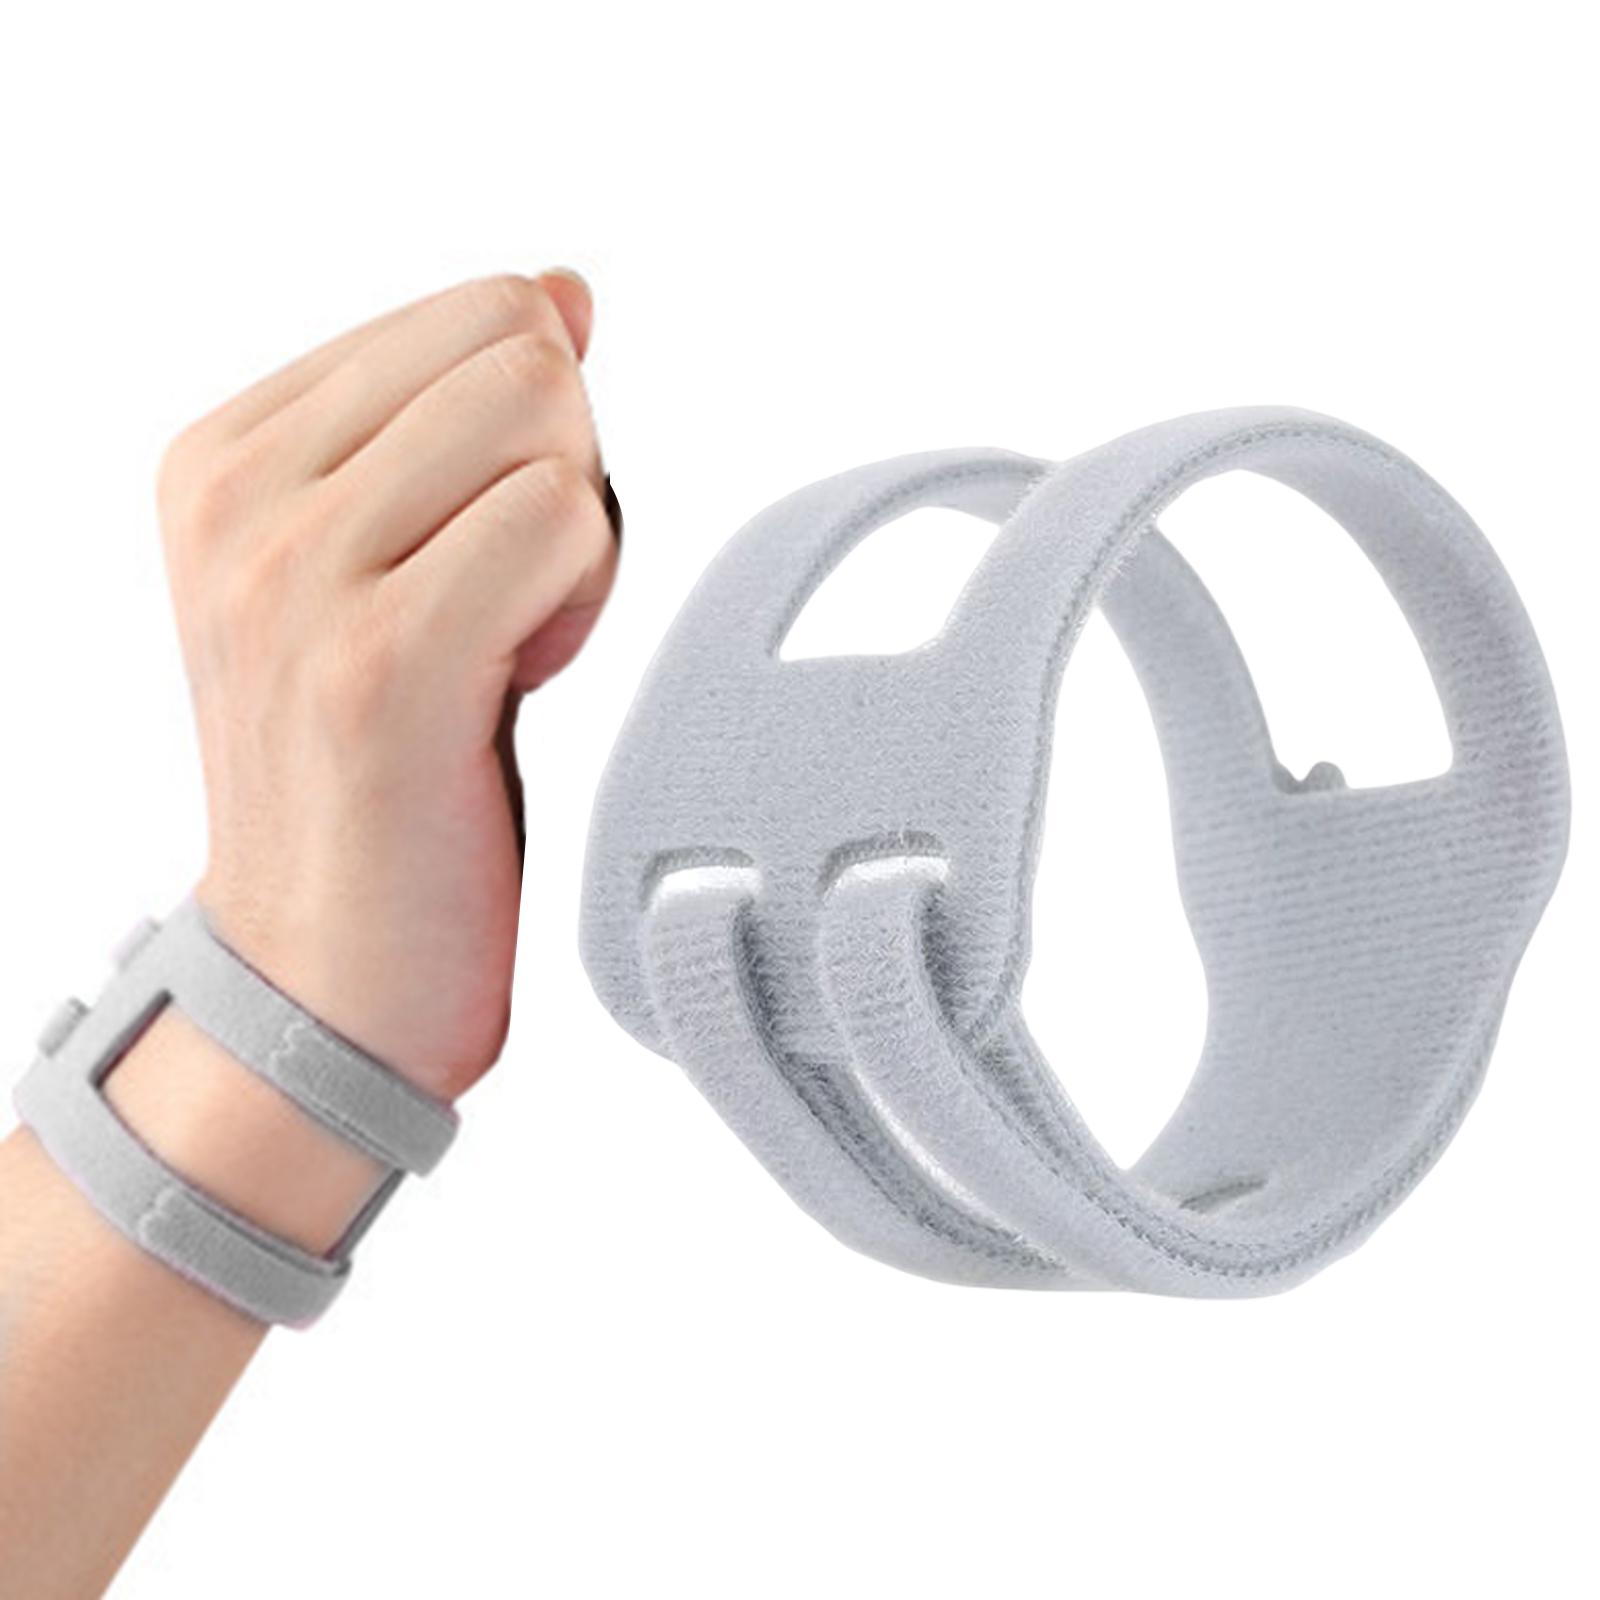 Tfcc Wrist Brace Sprain Protection Portable for Yoga Fitness Weight Bearing Grey